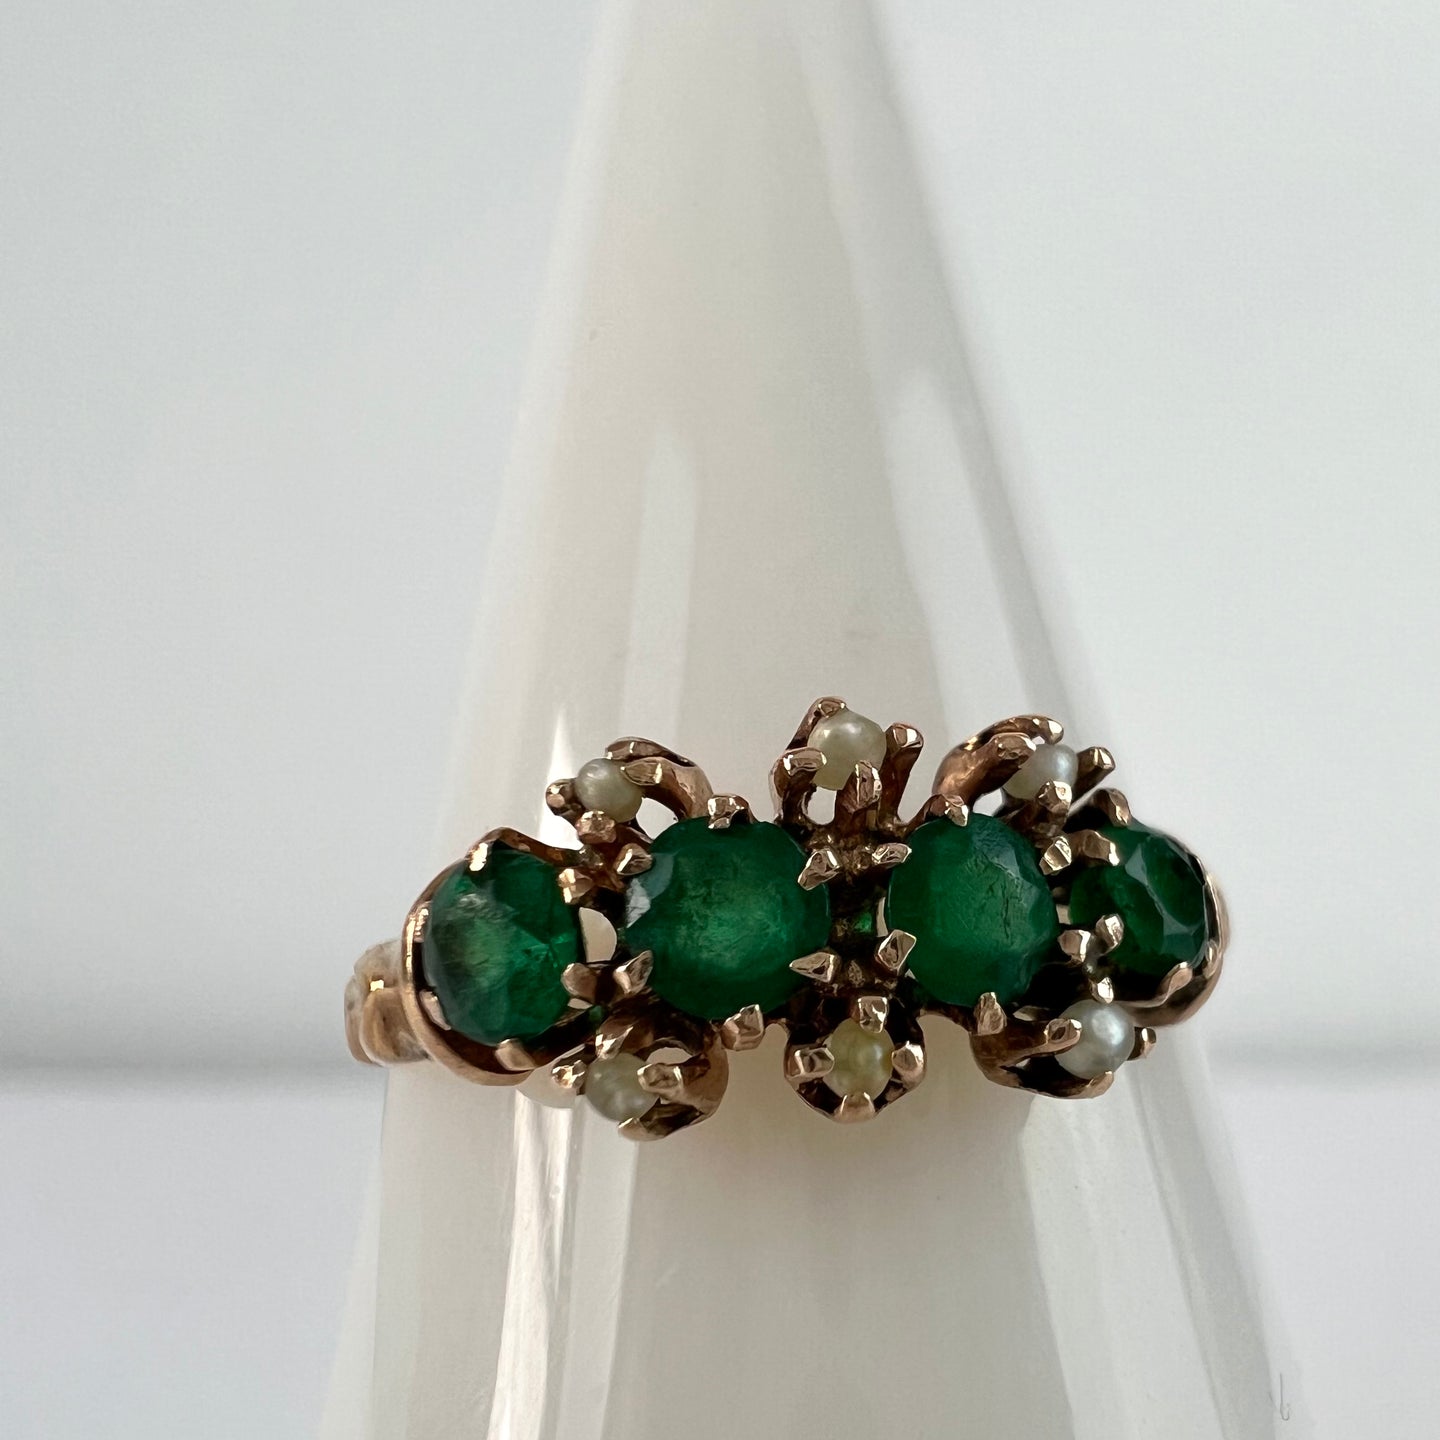 Antique Emerald Ring with Pearls on Gold Band Setting Size 7.5. Antique setting. Perfect Mother's day gift for a mother of four, who love unique and antique jewelry.